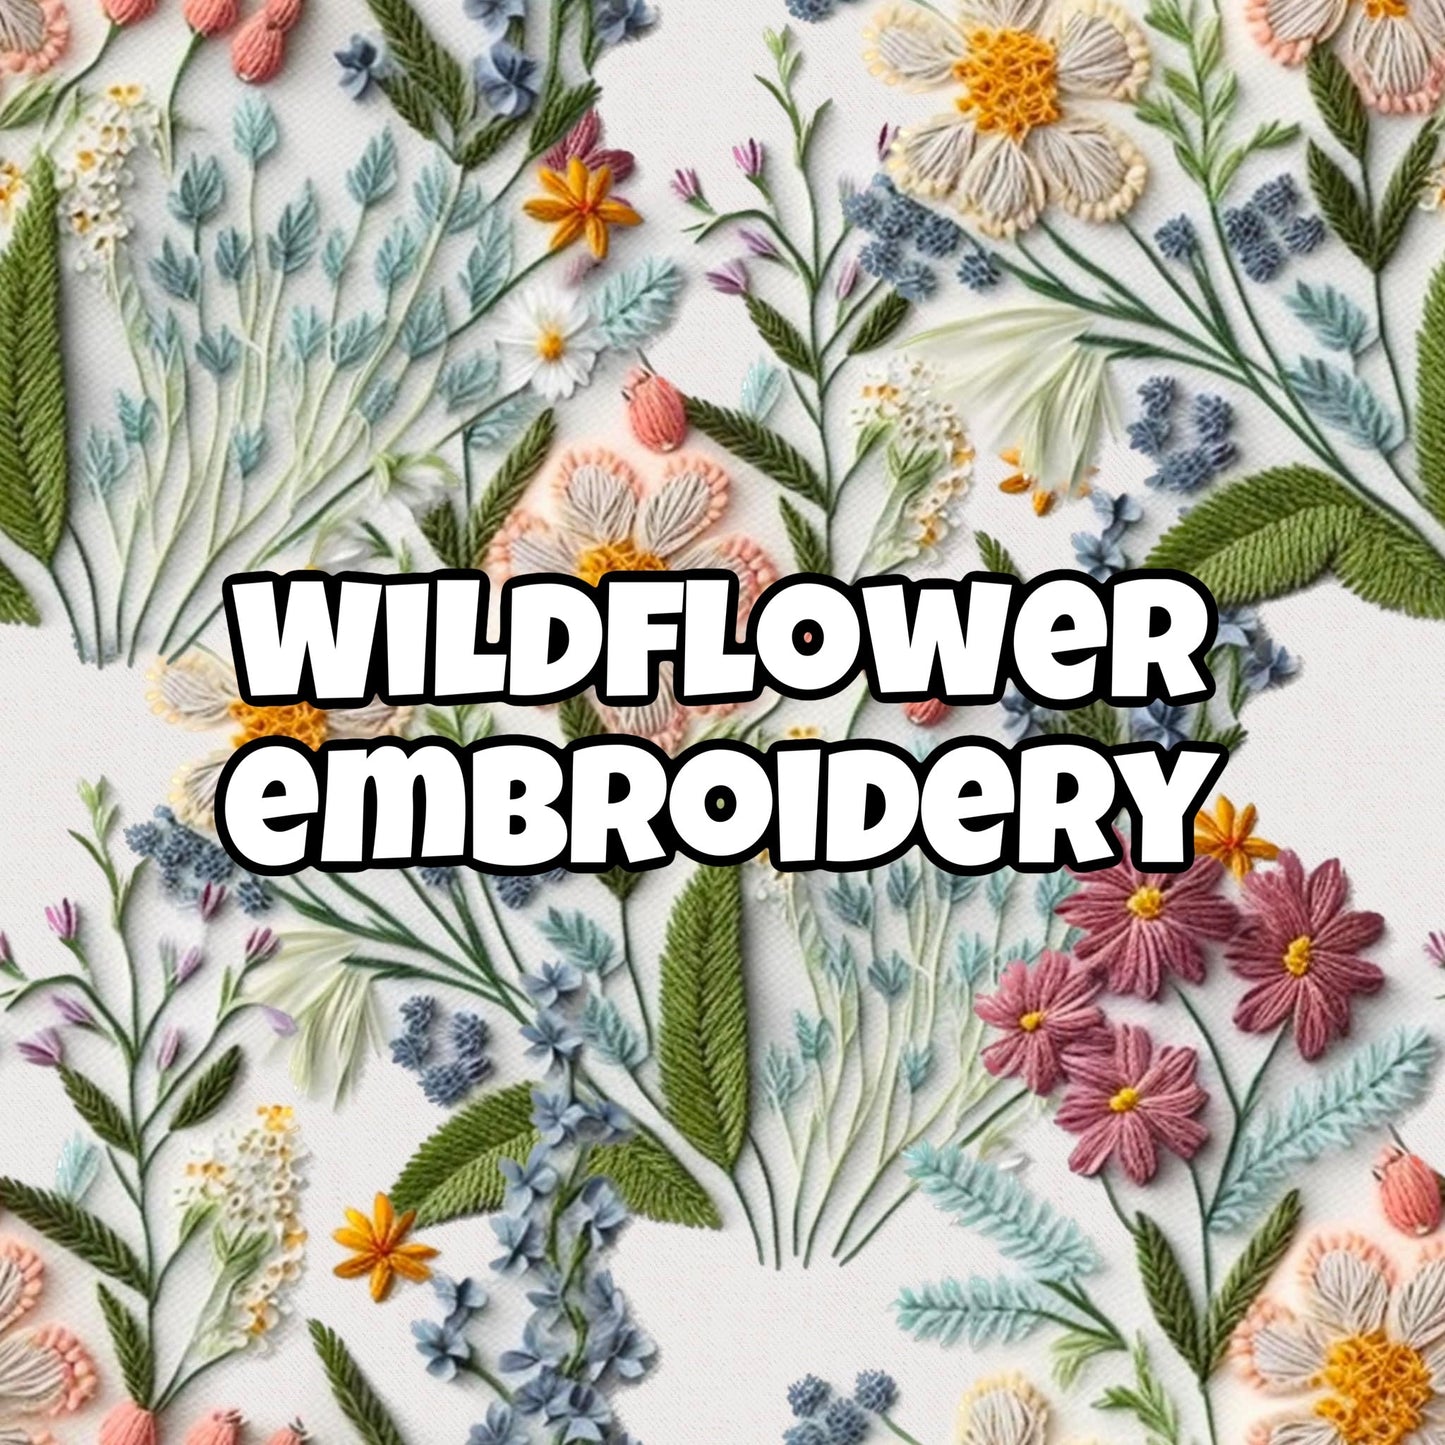 WILDFLOWER EMBROIDERY